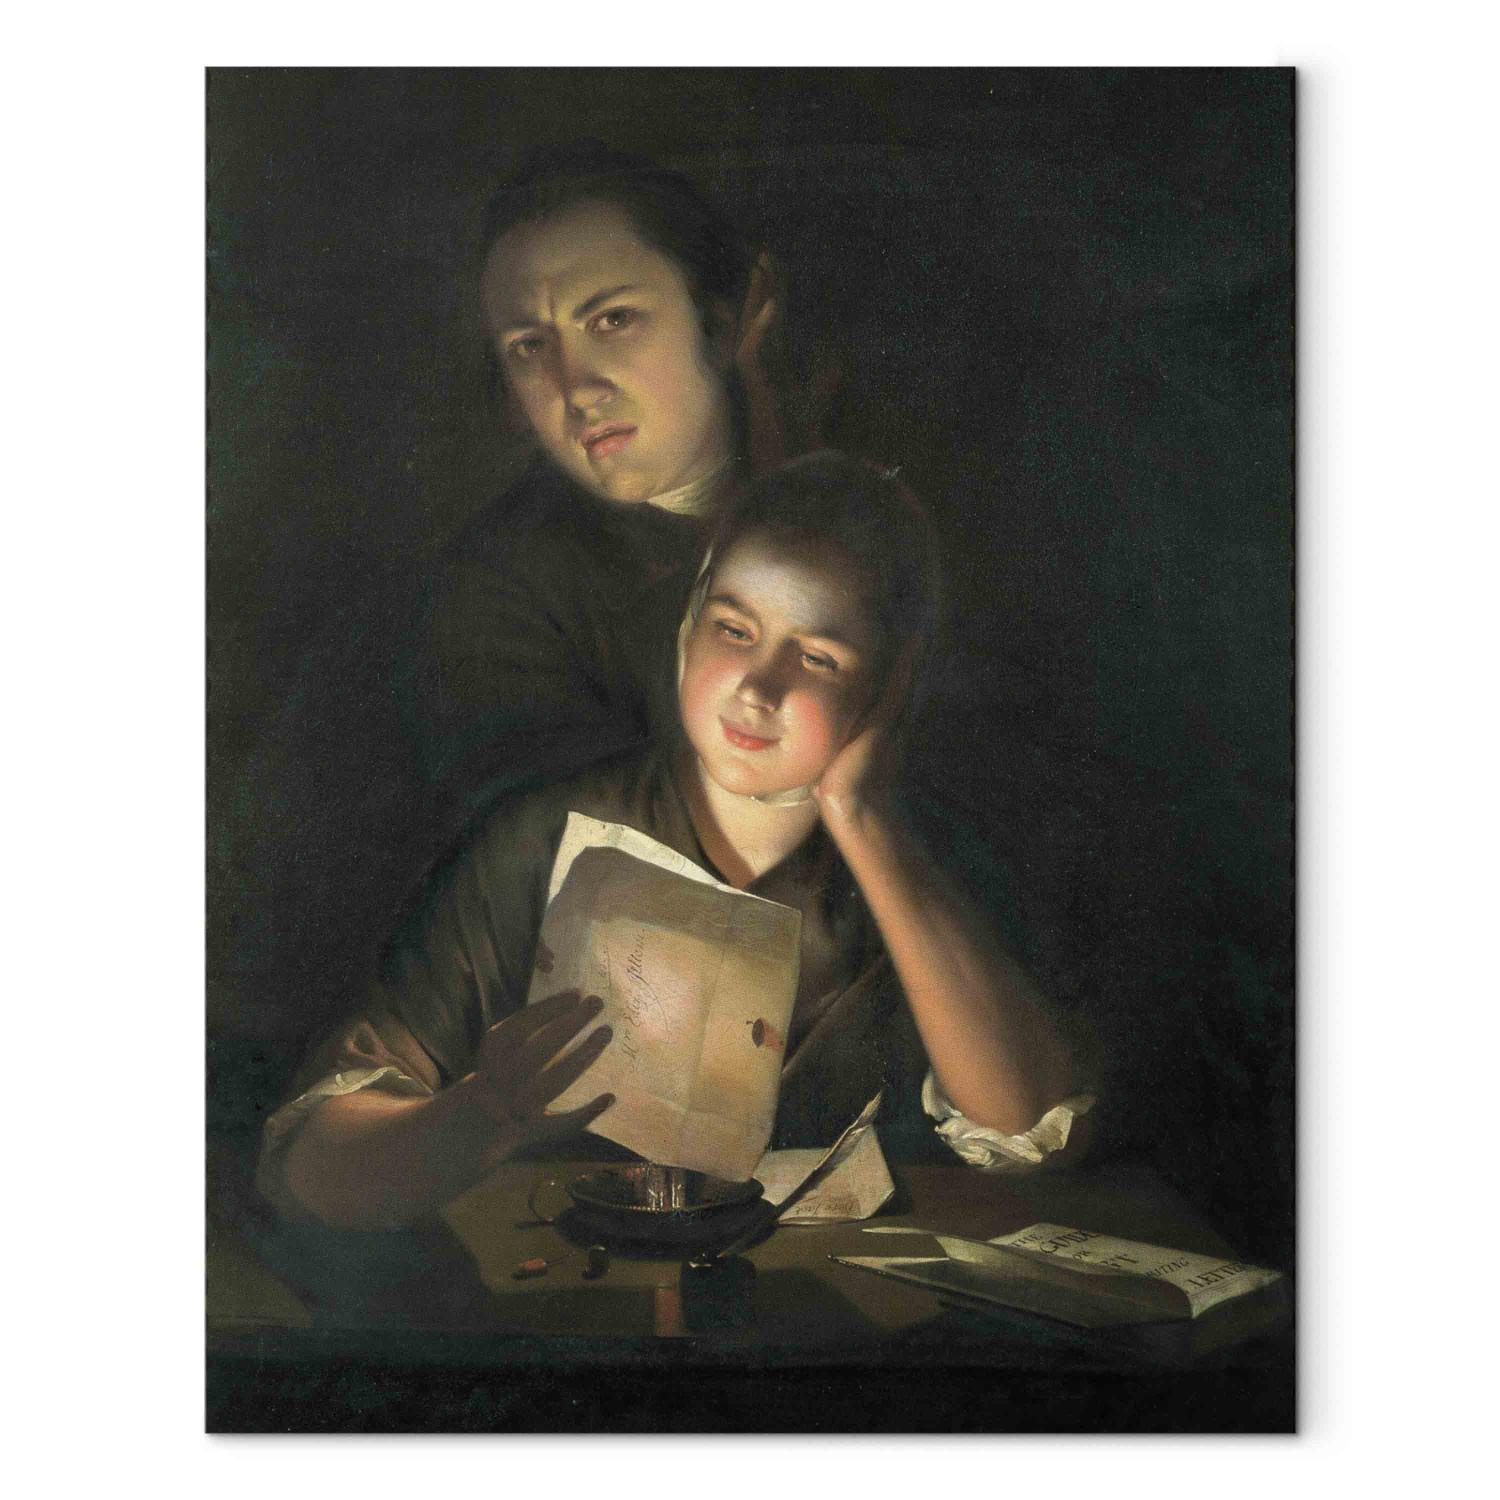 Cuadro famoso A Girl reading a letter by Candlelight, with a Young Man peering over her shoulder